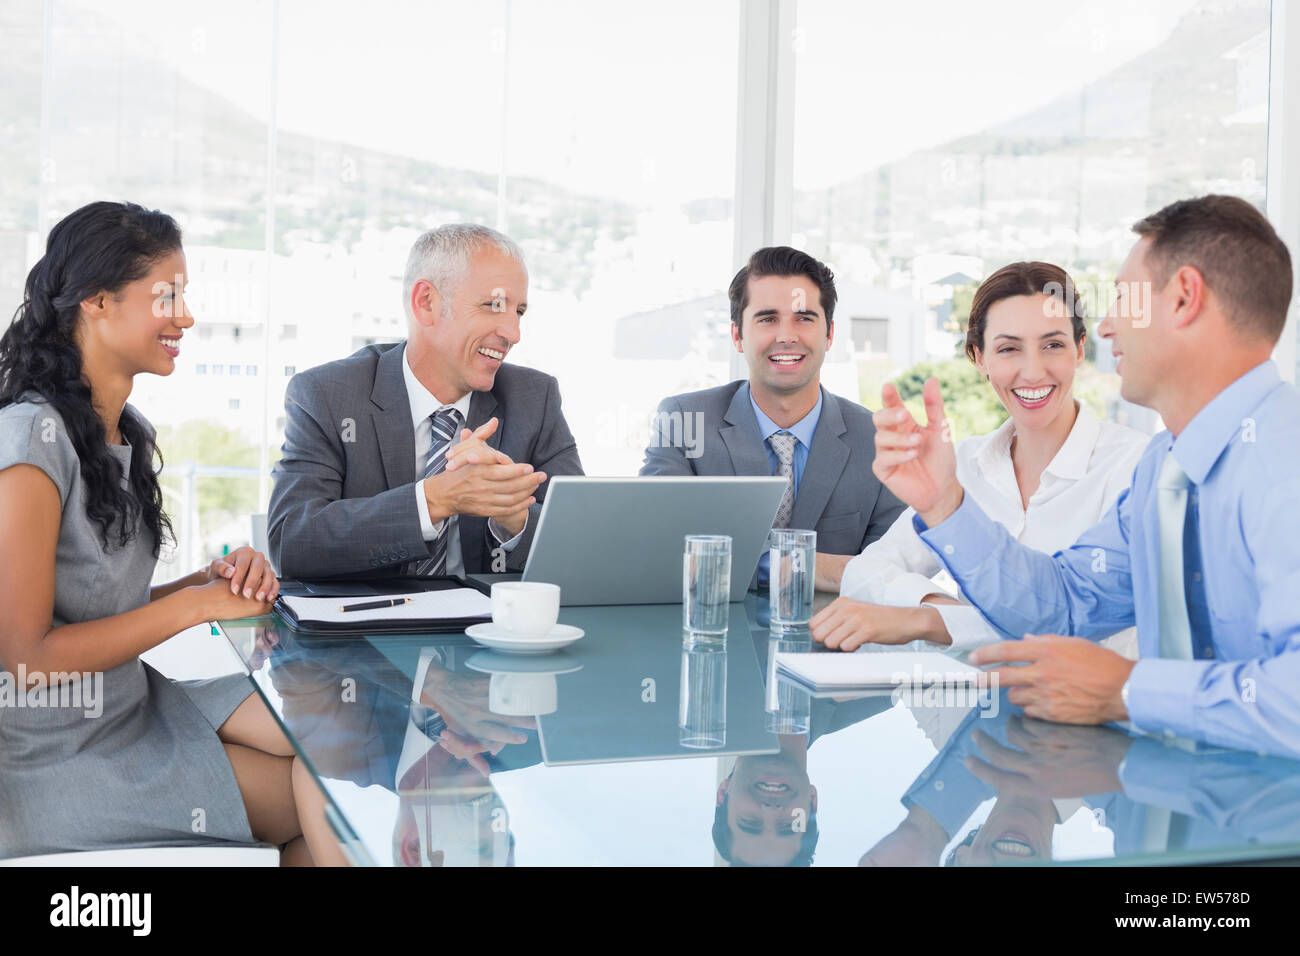 Business team laughing together Stock Photo